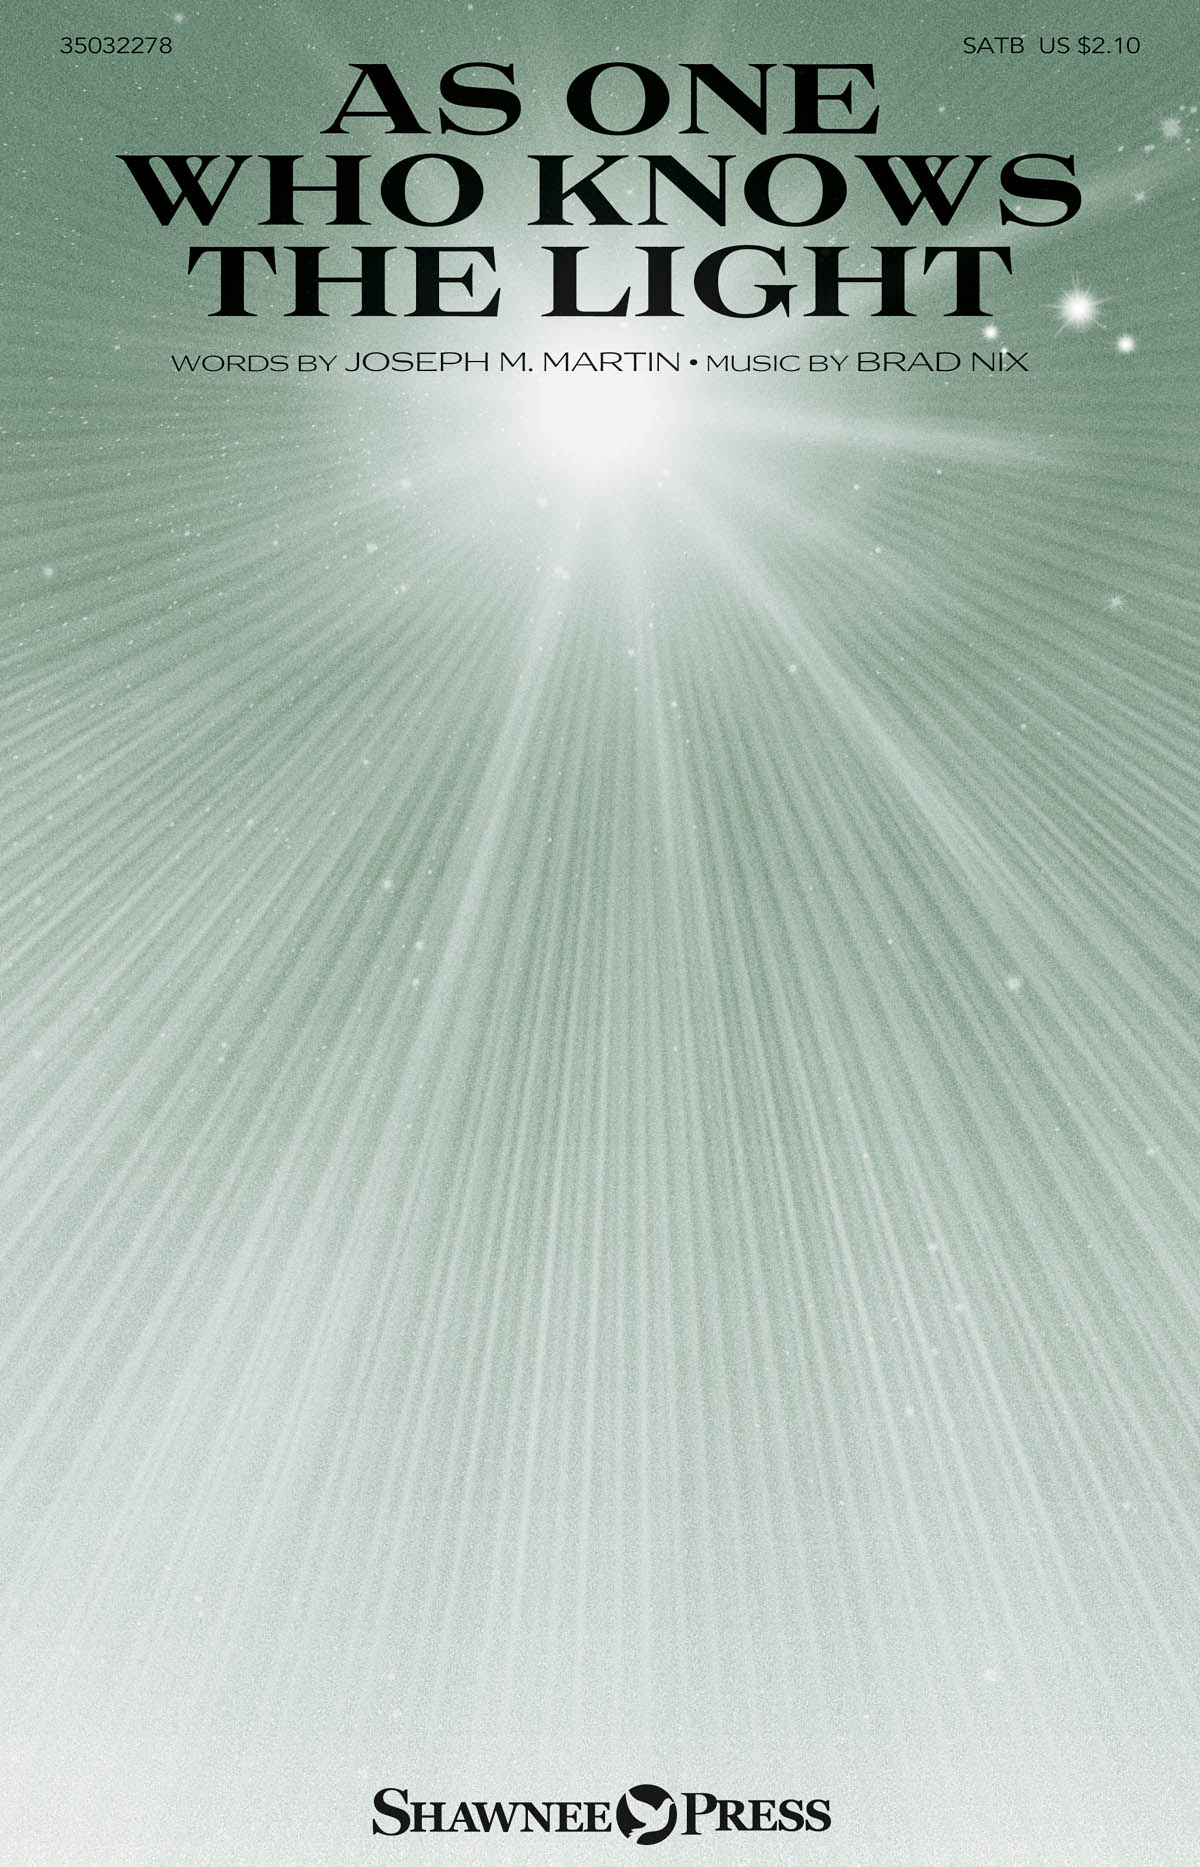 Brad Nix: As One Who Knows the Light: SATB: Vocal Score